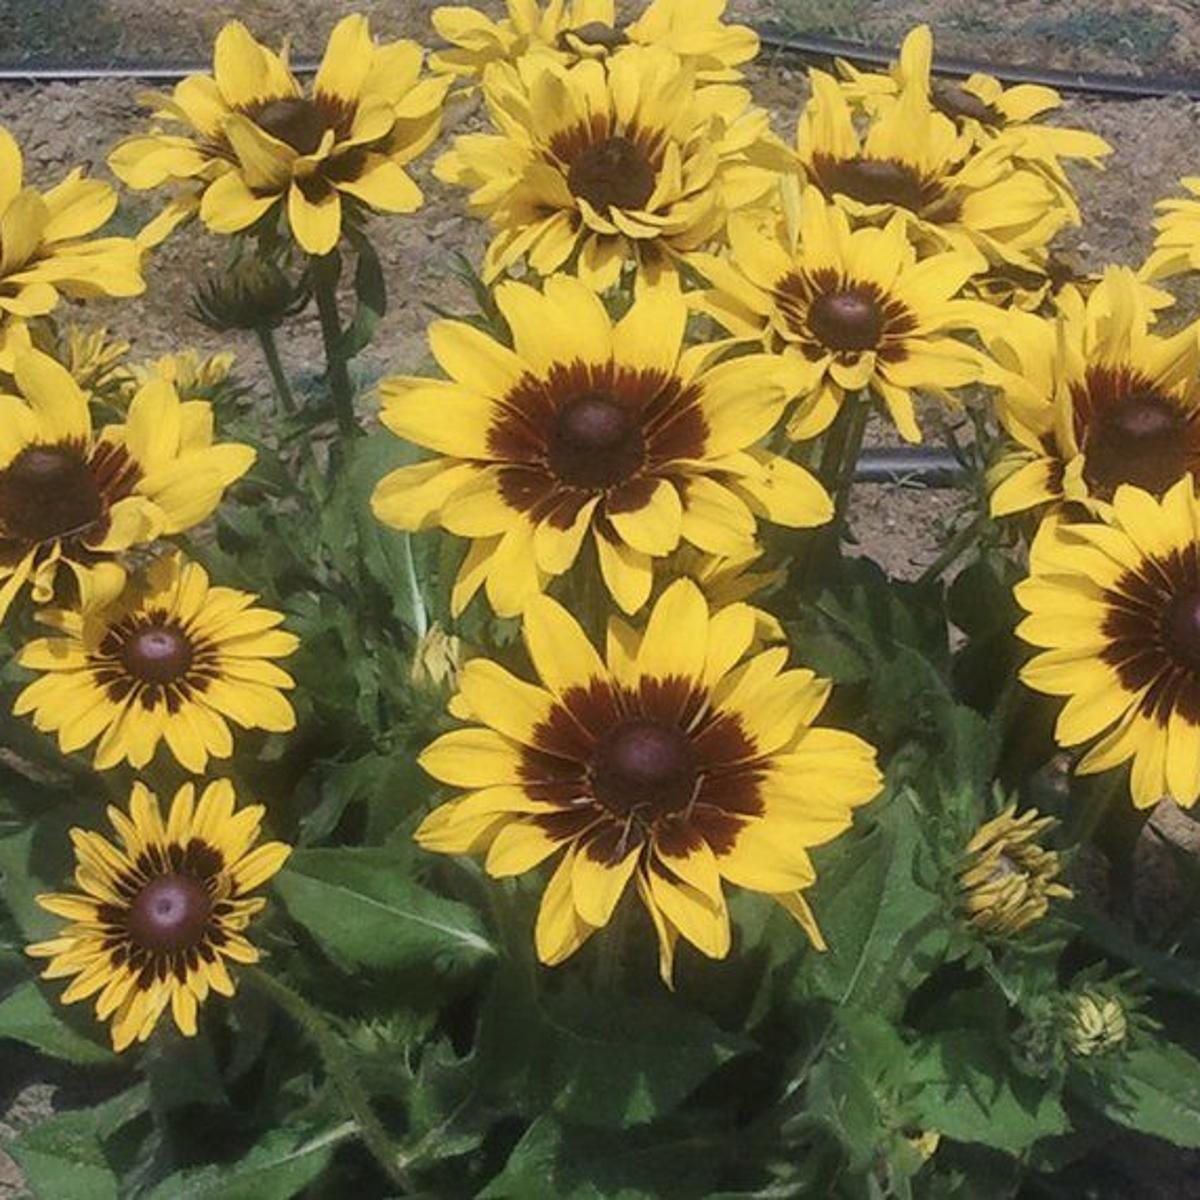 Southern Gardening Rudbeckia Are Great Flower Choices For Heat Lifestyles Meridianstar Com,Juniper Ground Cover Ideas